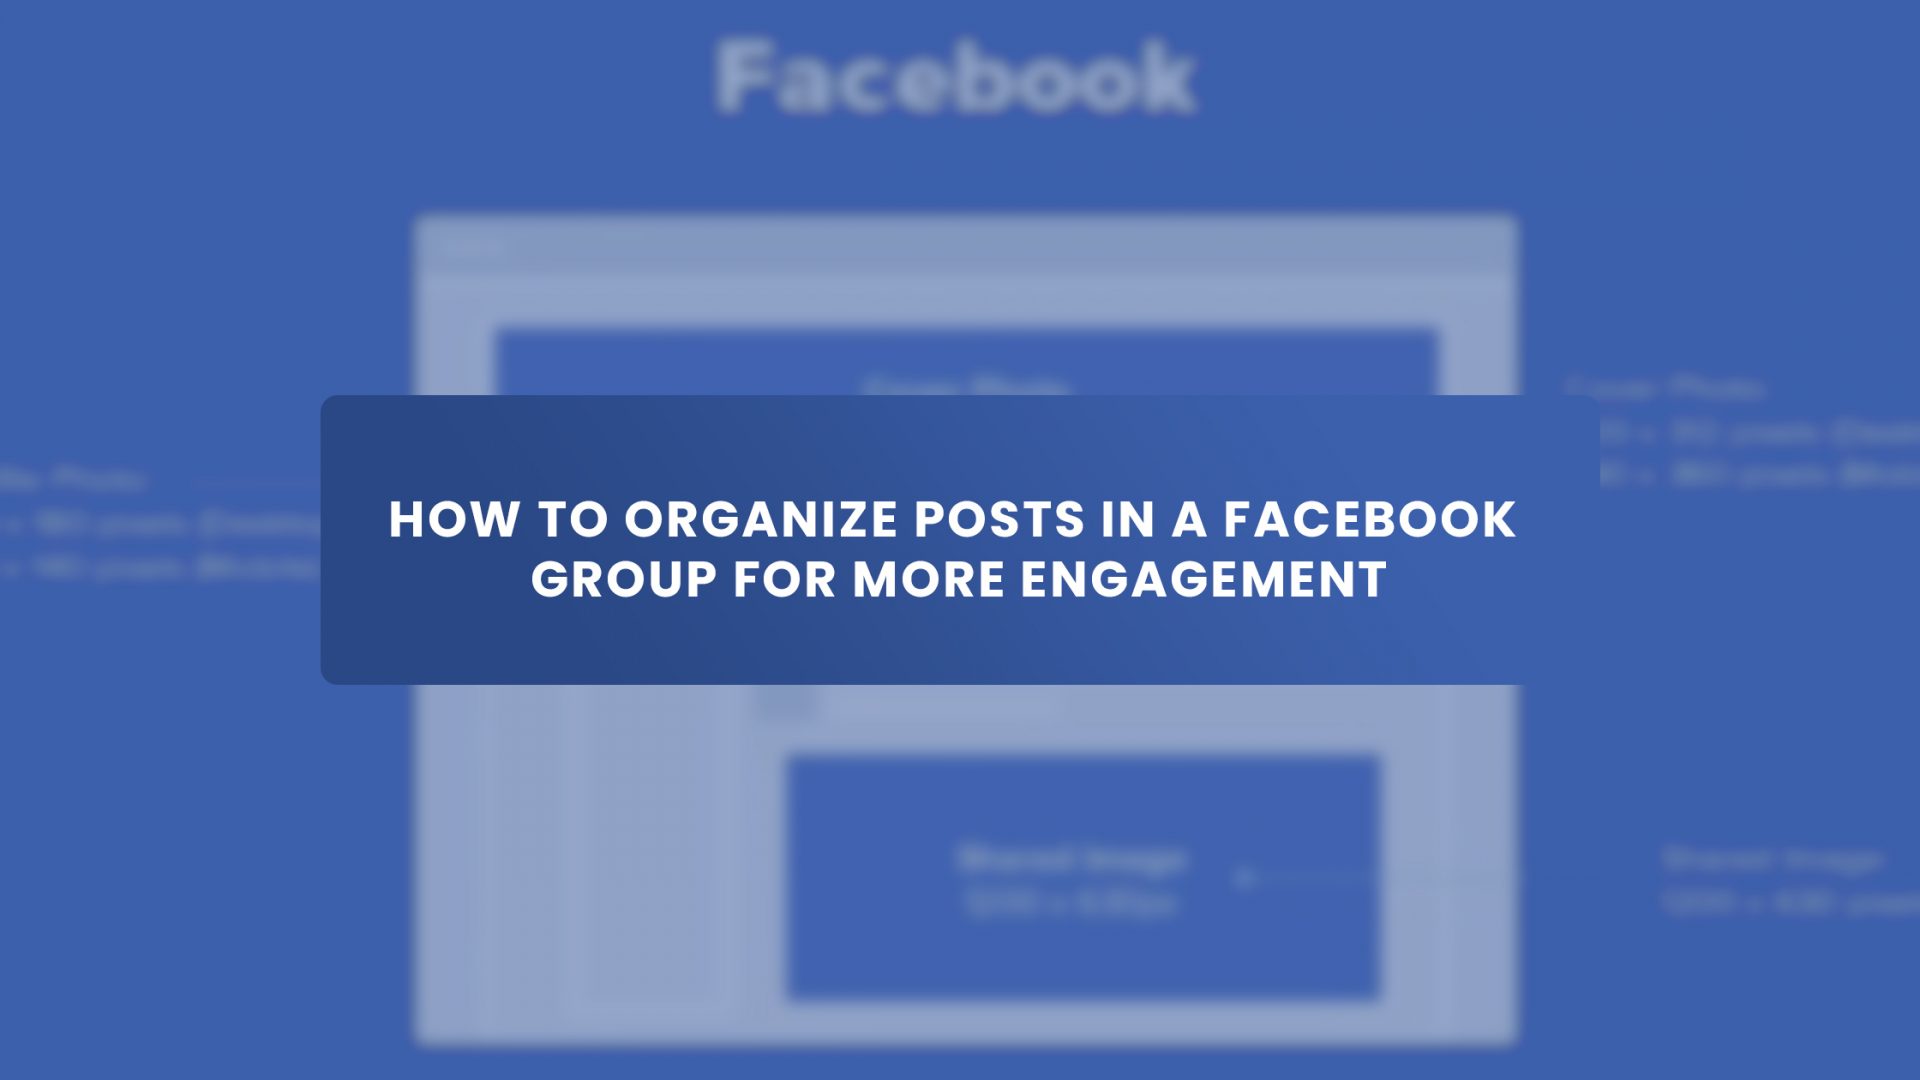 How to Organize Posts in a Facebook Group for More Engagement